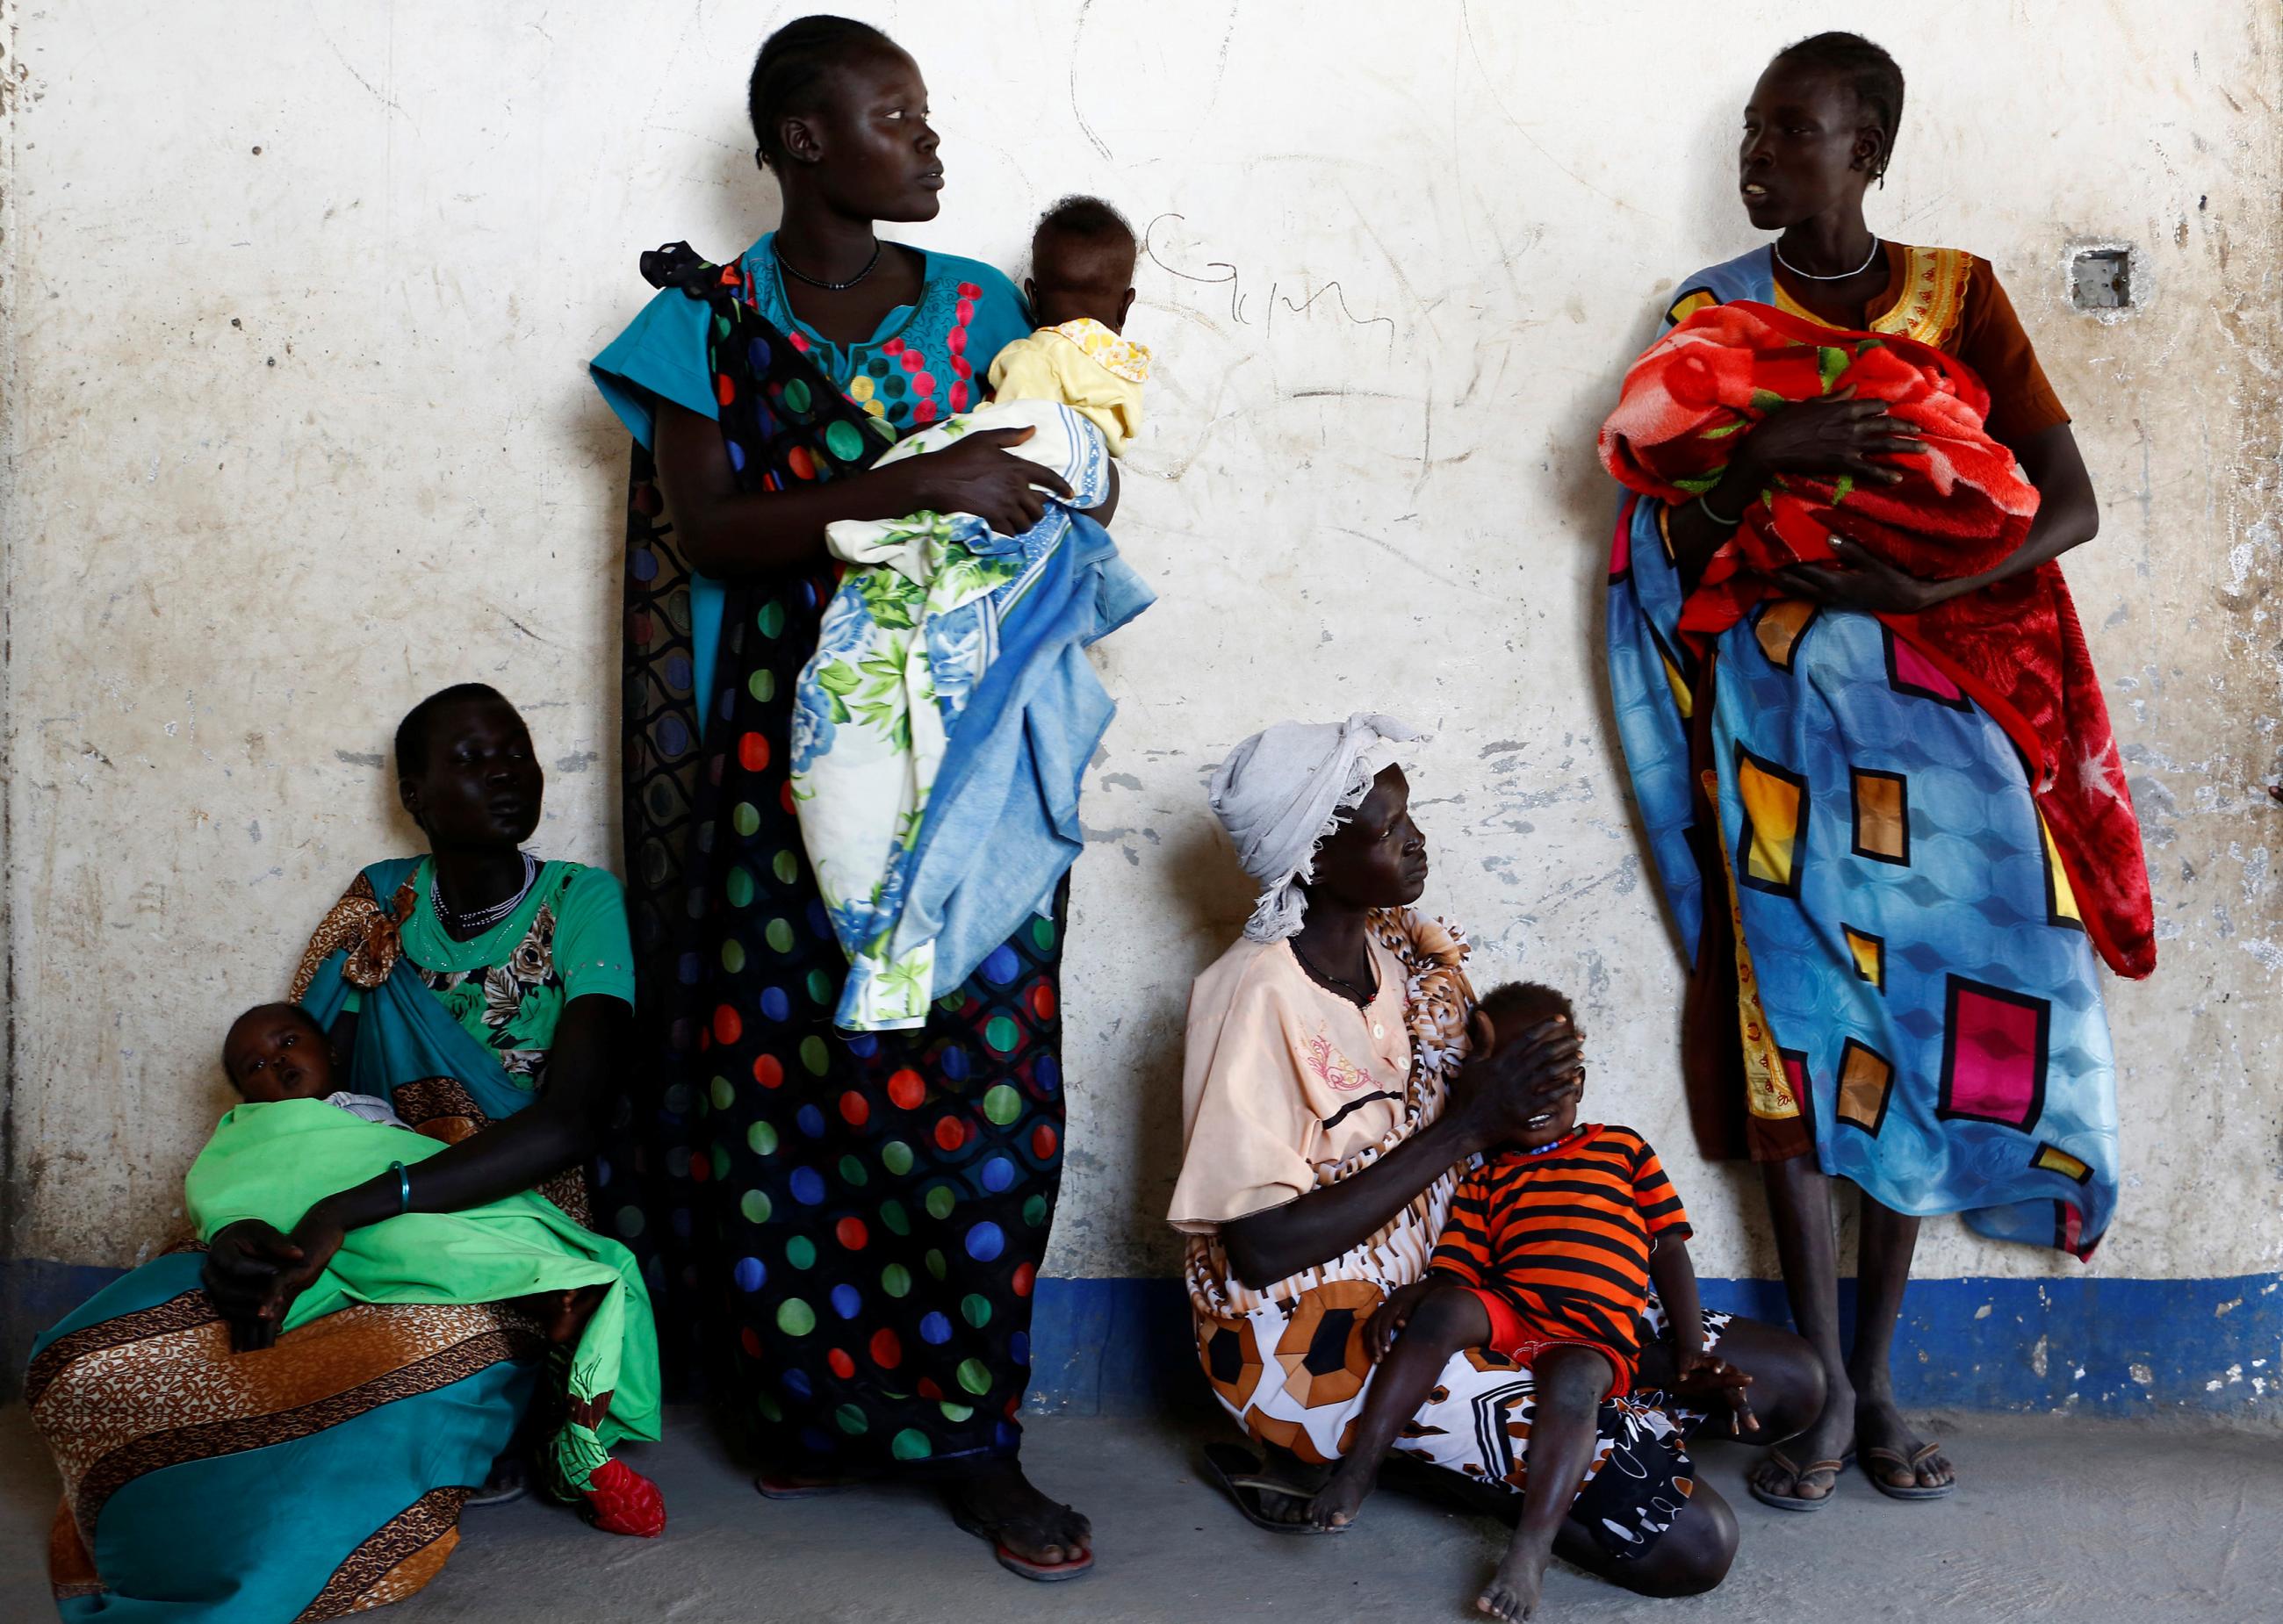 Women hold their babies as they wait for a medical check-up at a UNICEF-supported mobile health clinic in Nimini village, Unity State, South Sudan, on February 8, 2017.